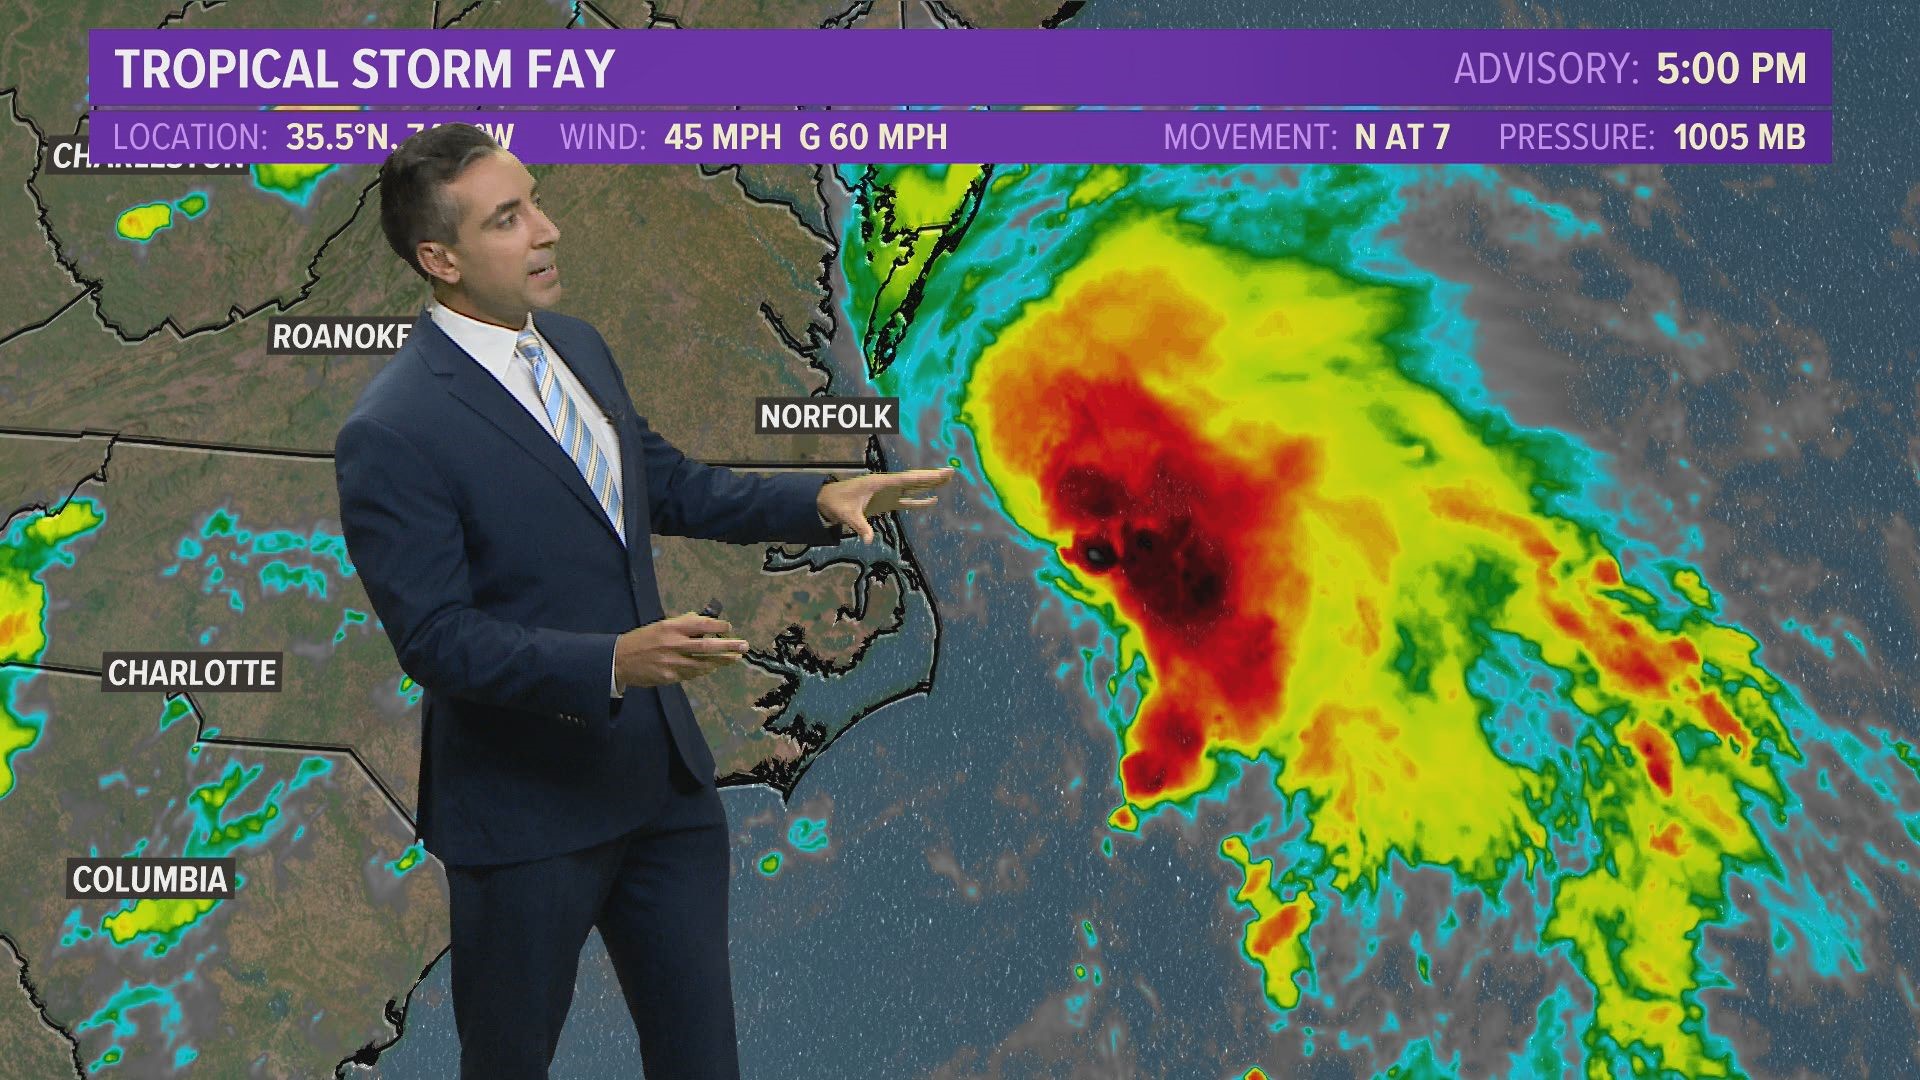 13News Now meteorologist Tim Pandajis gives the latest forecast tracks and impacts expected by Tropical Storm Fay.